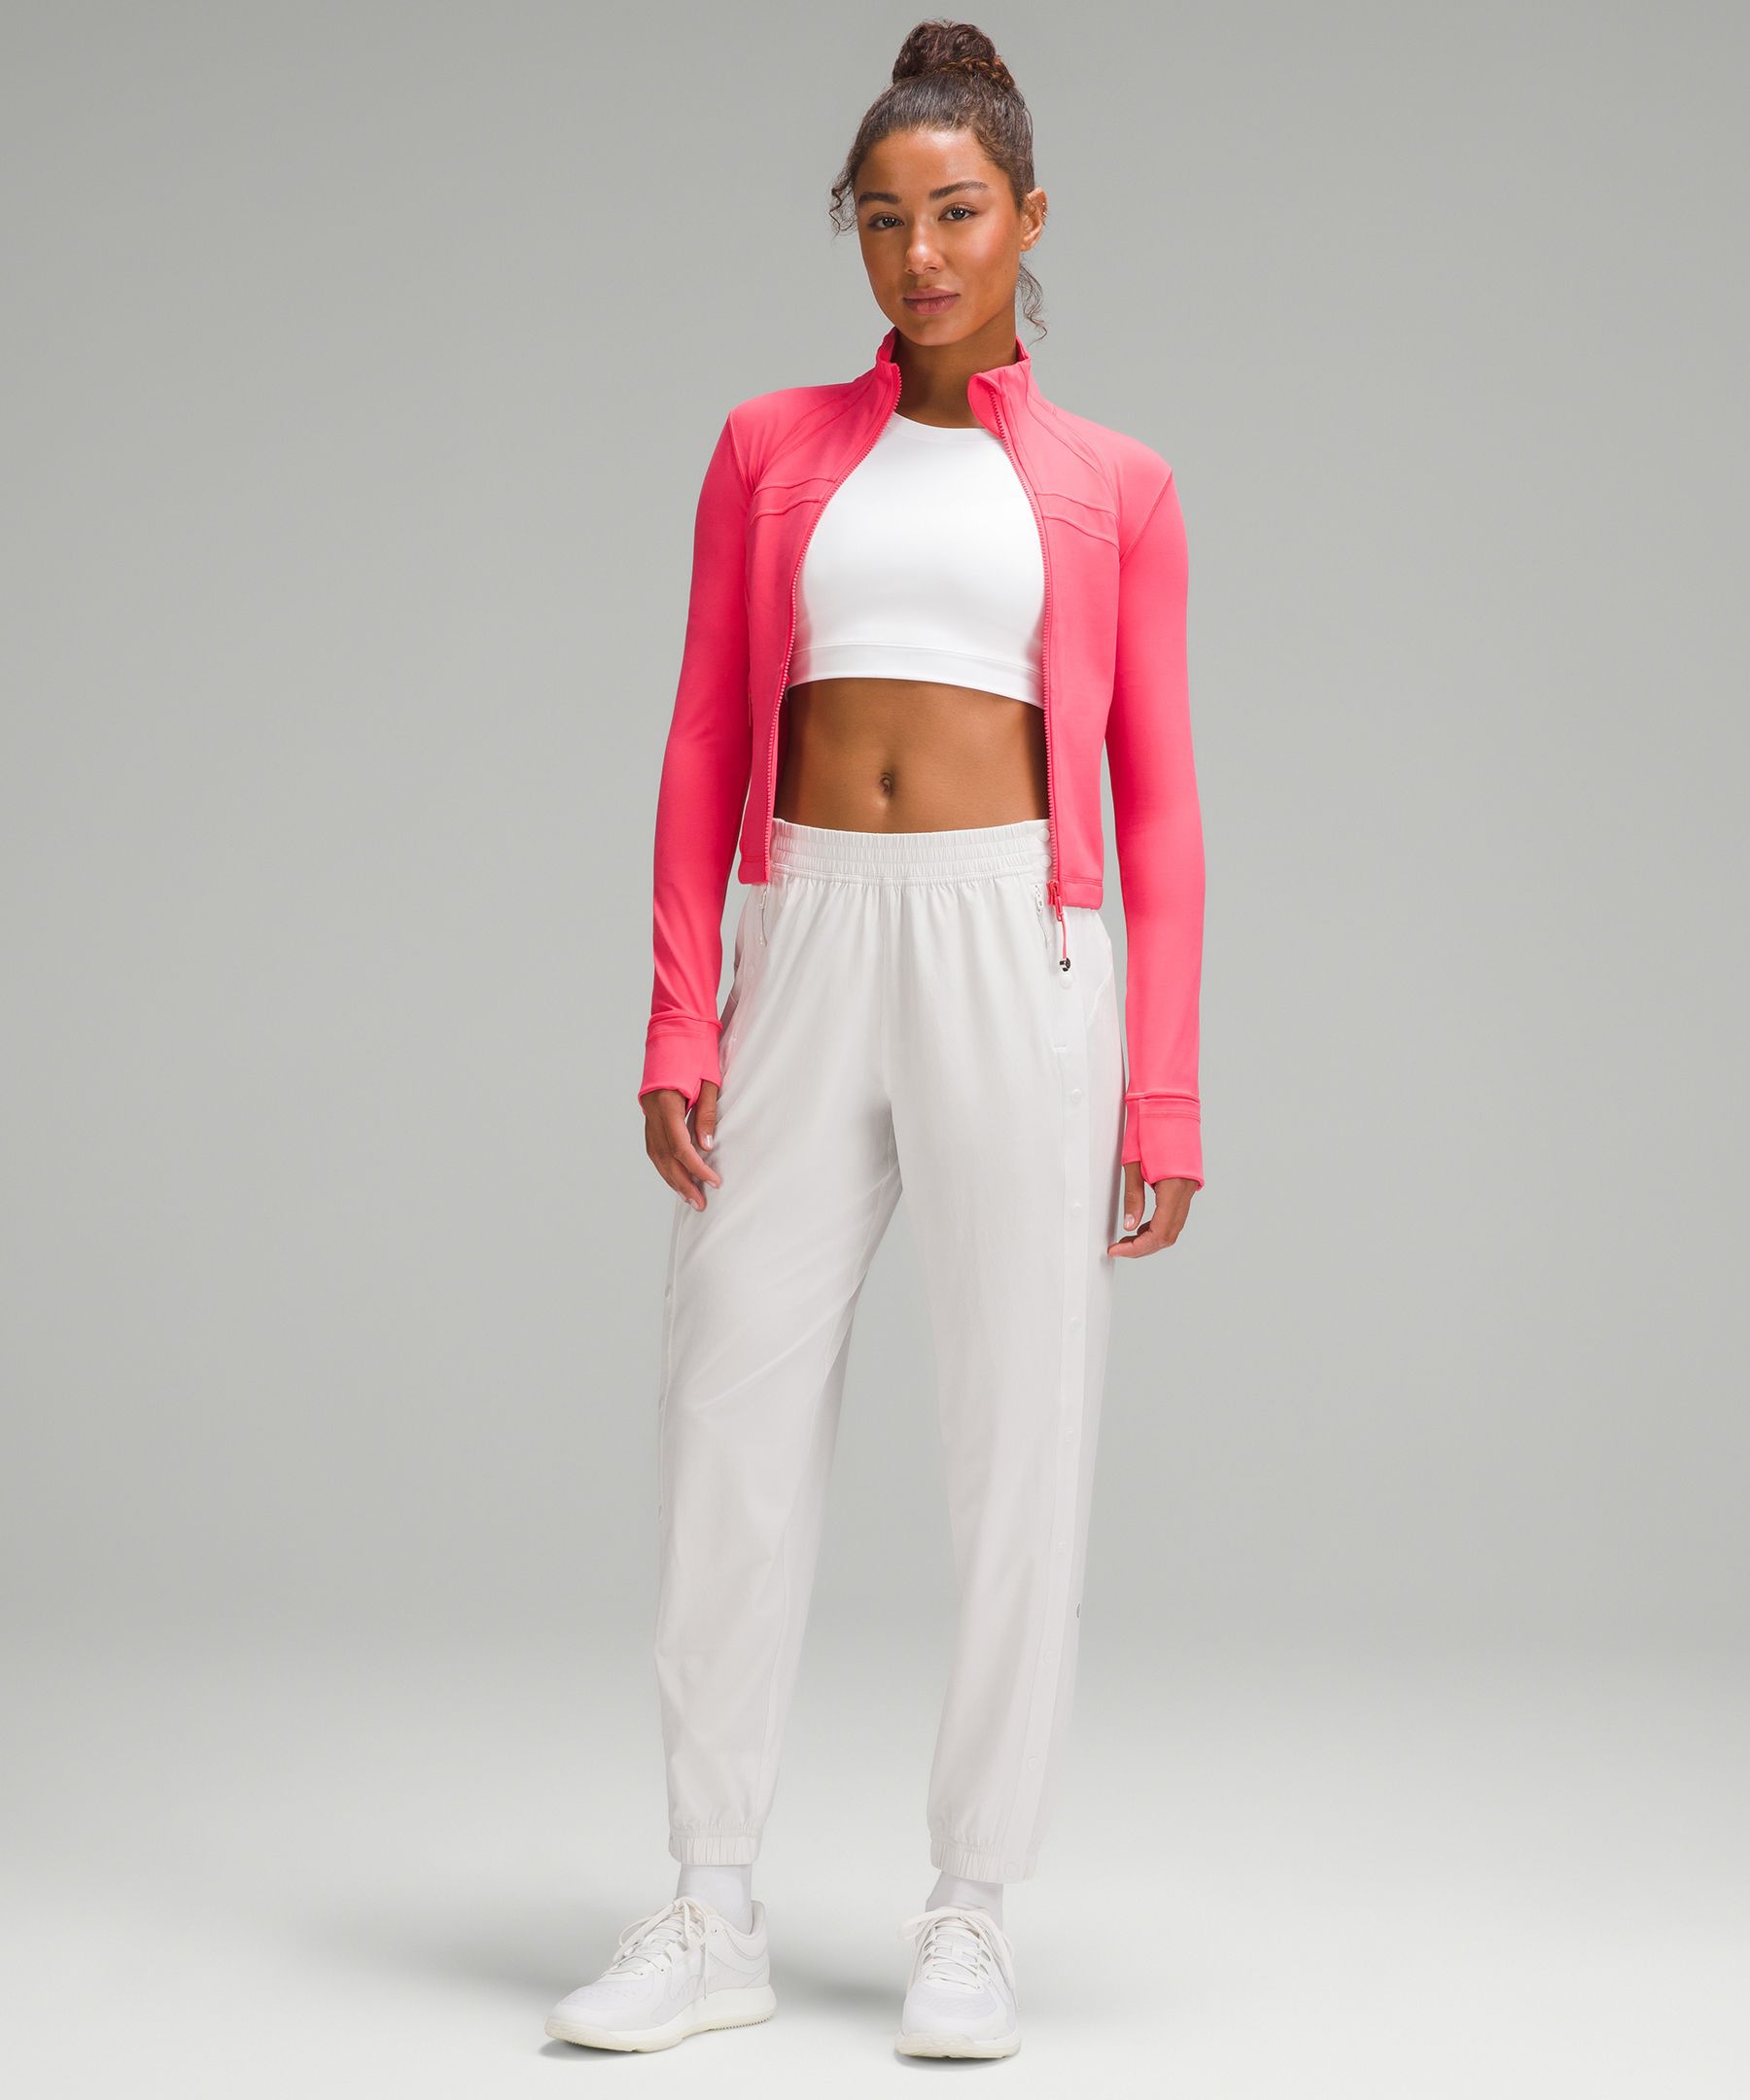 lululemon athletica Pink Athletic Sweatsuits for Women